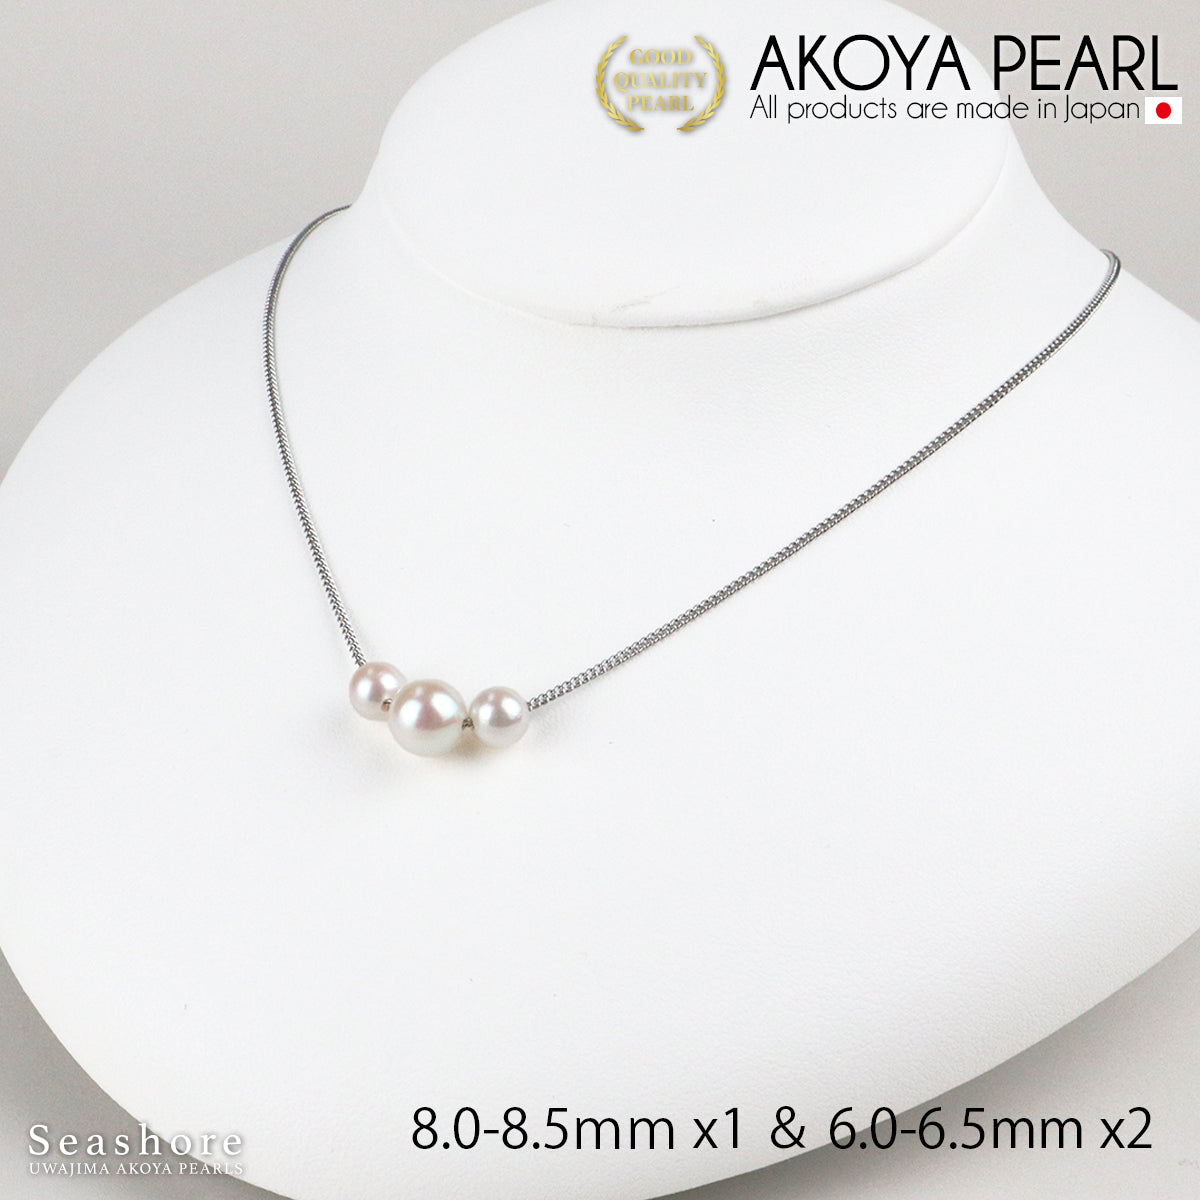 Akoya pearl 3 pearl through necklace [6.0-8.5mm] Brass rhodium pearl necklace 2 types to choose from